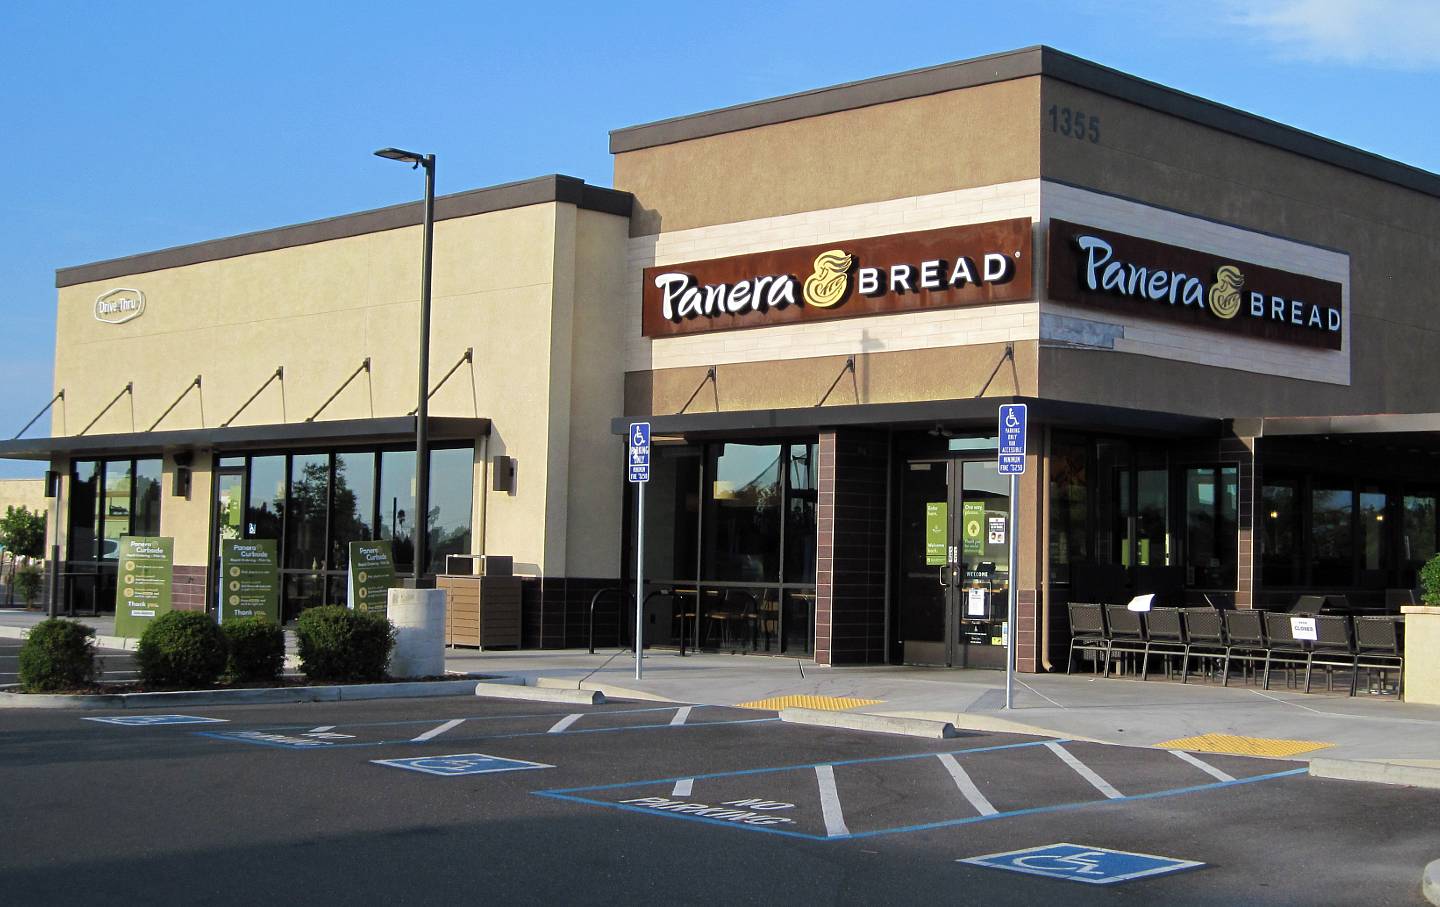 An empty Panera Bread in Manteca, Calif., may not look like much, but the rise of Panera and its dismal present reveals a lot about 21st-century capitalism.